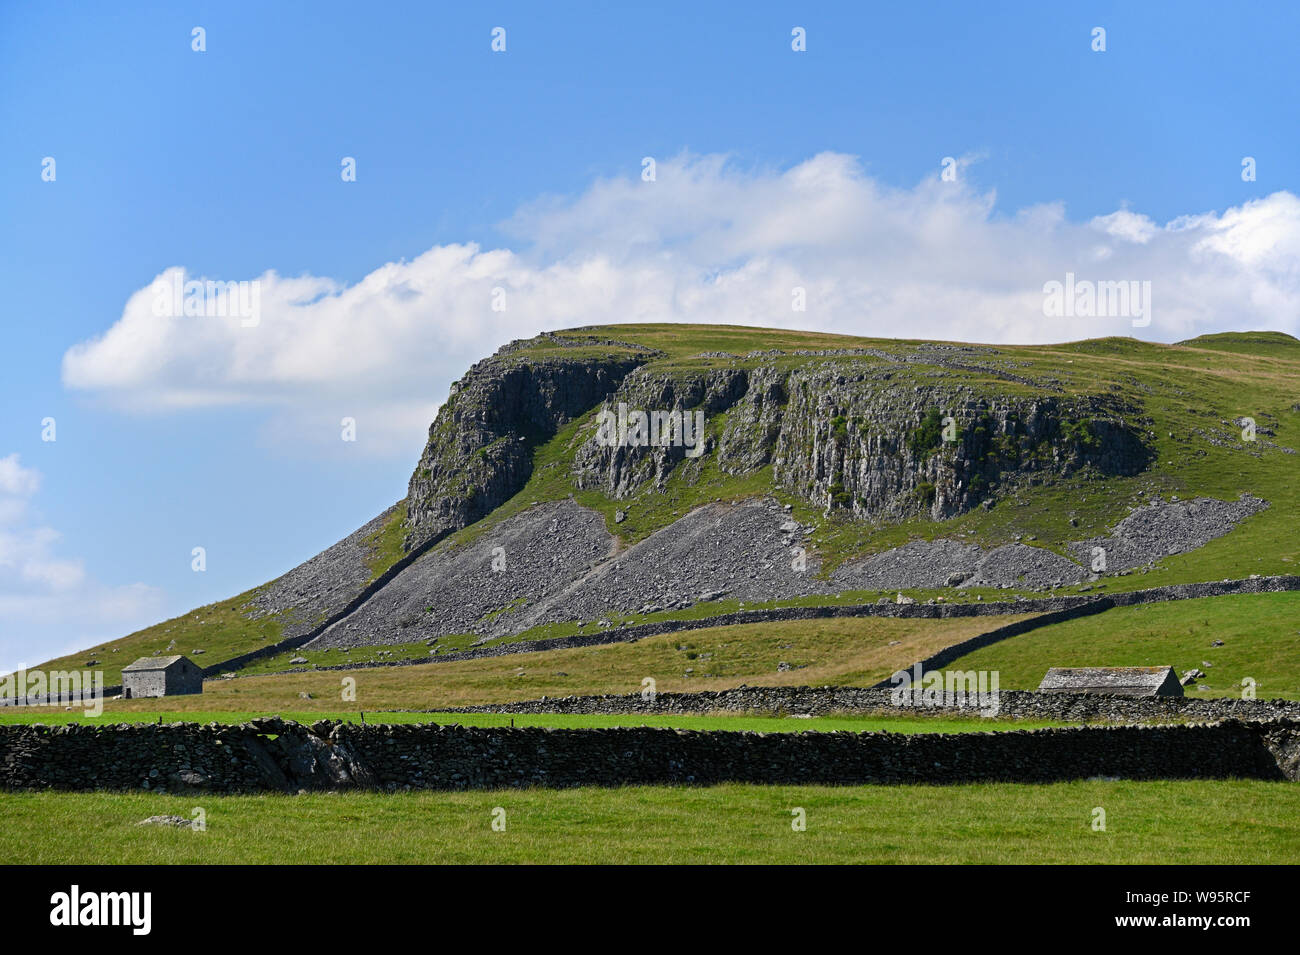 Robin Proctor's Scar, Norber. Austwick, Yorkshire Dales National Park, Craven, North Yorkshire, England, United Kingdom, Europe. Stock Photo